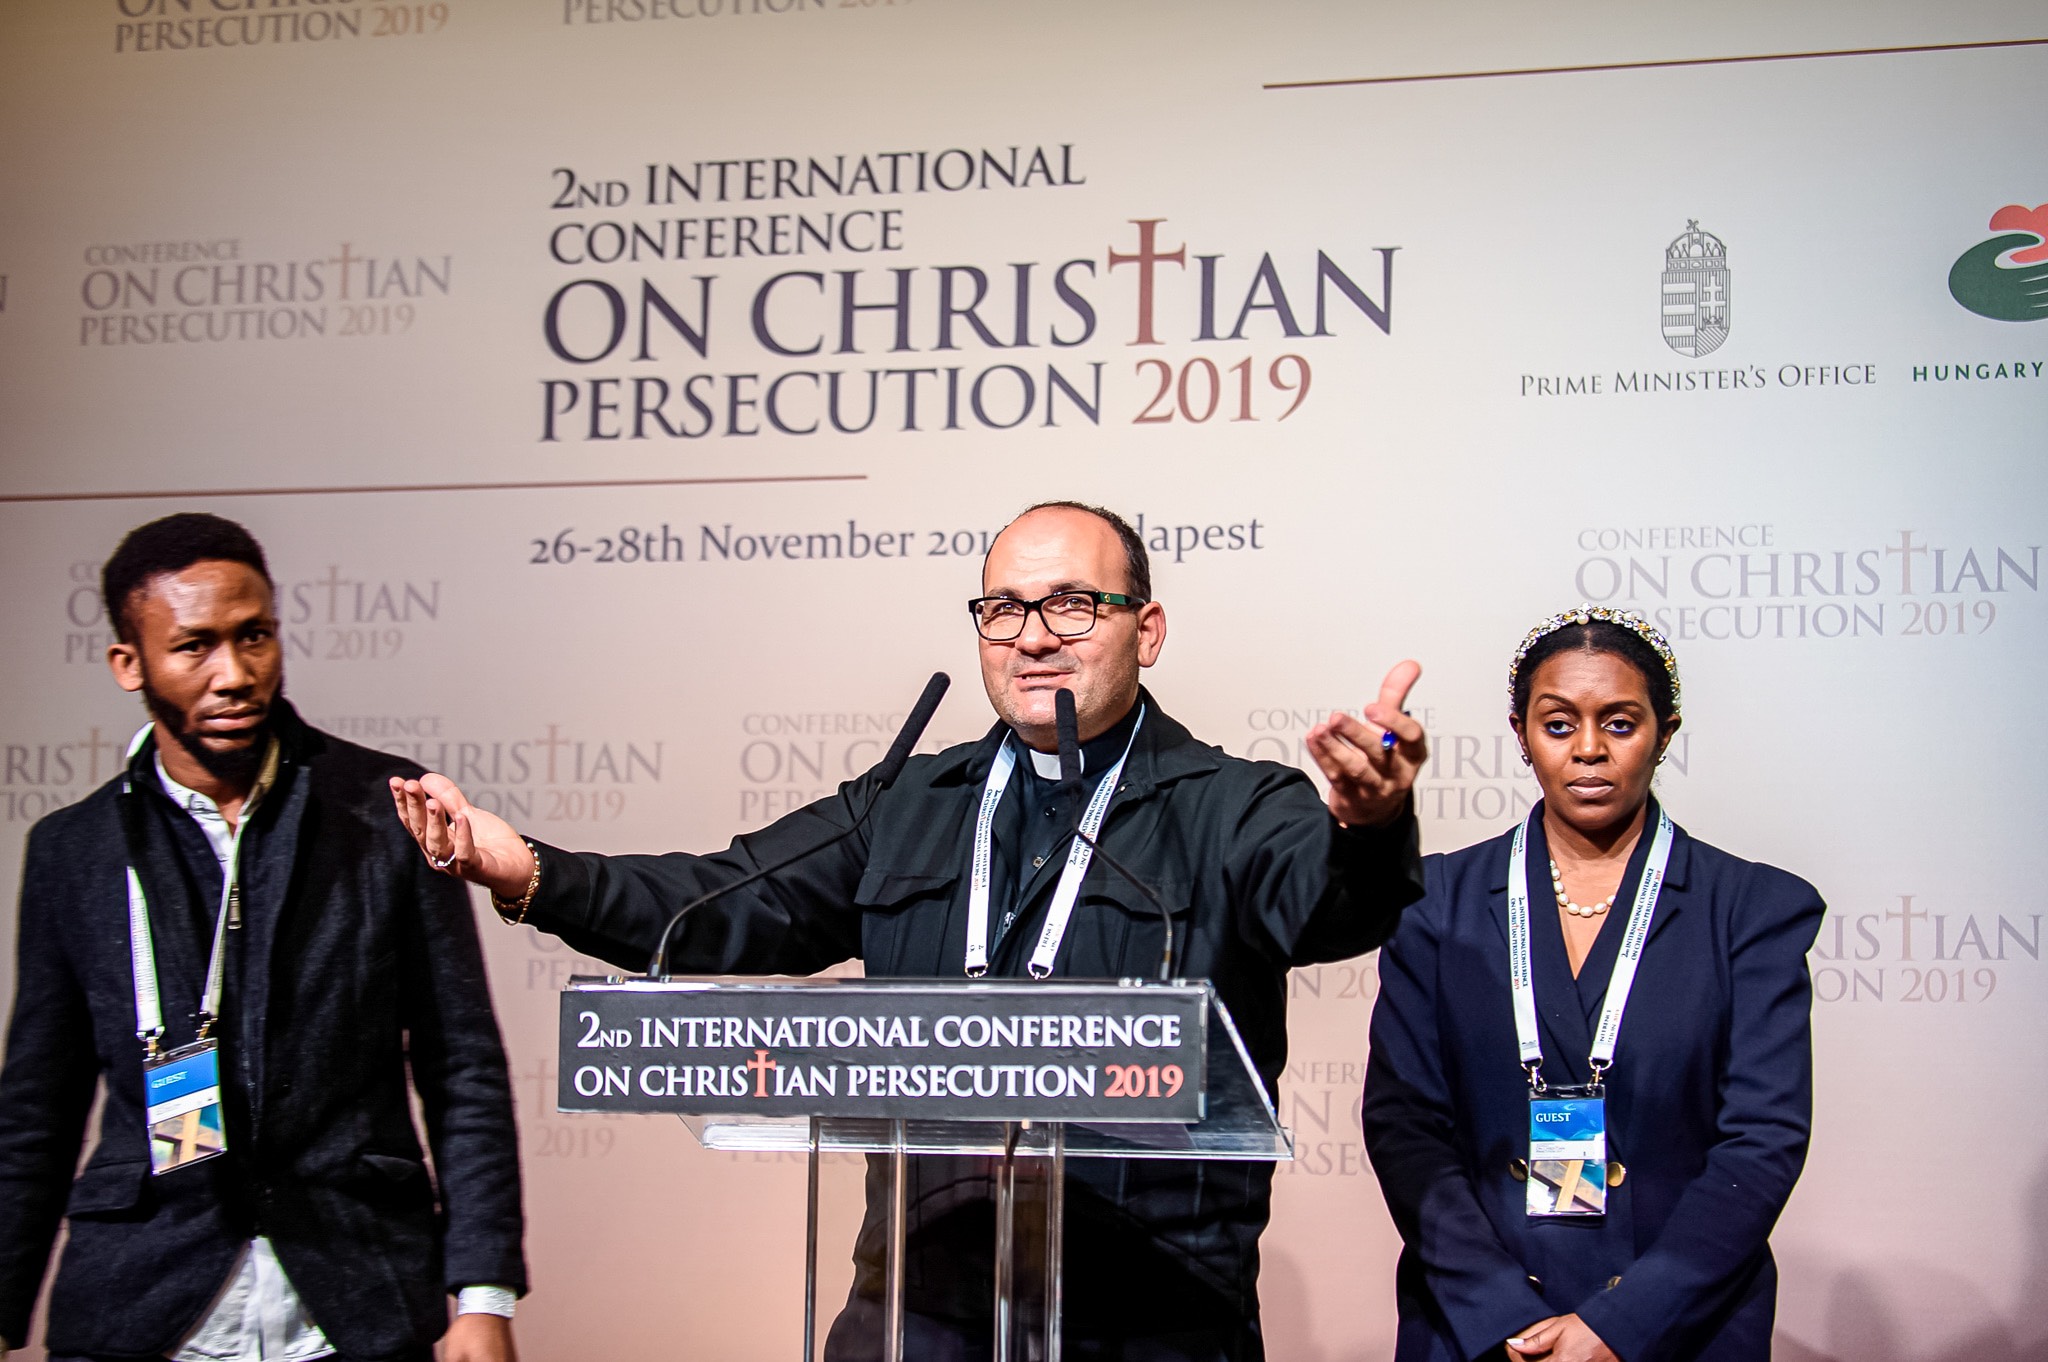 2nd-international-conference-on-Christian-persecution-2019